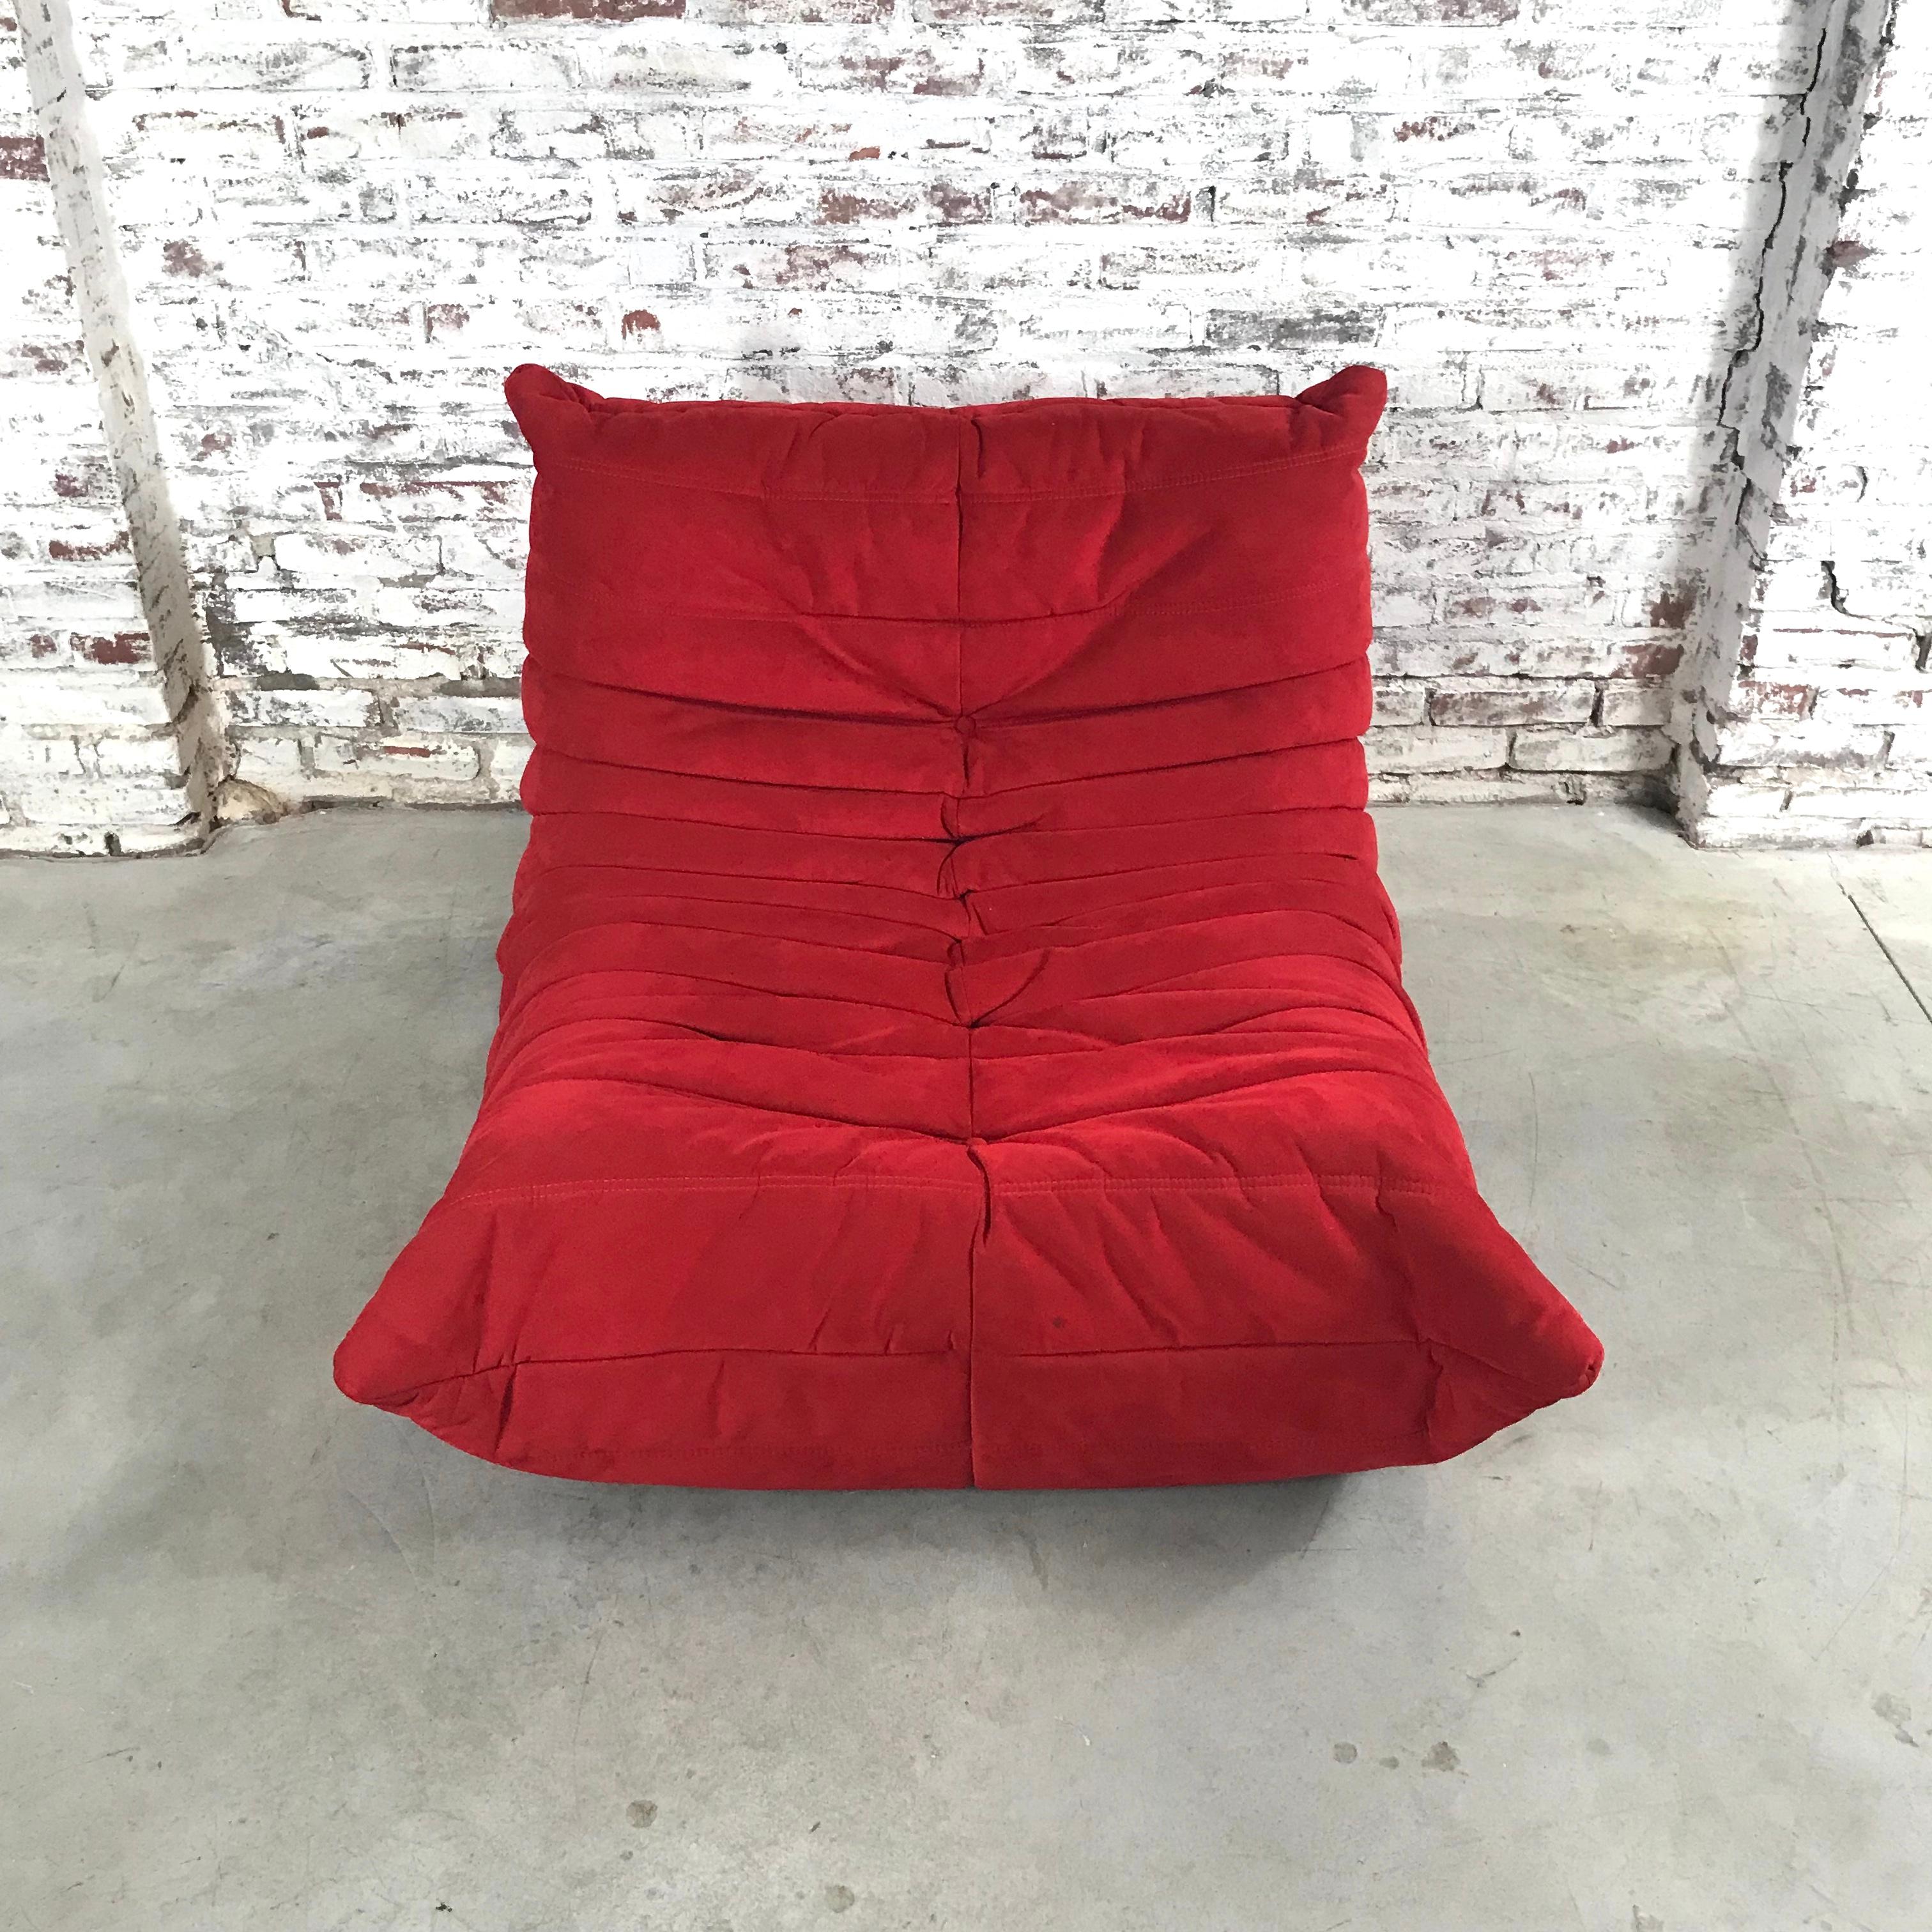 The Togo was designed by Michel Ducaroy in 1973 for Ligne Roset. This original Togo lounge chair or “fireside chair is upholstered with Alcantara in the color Goya red.